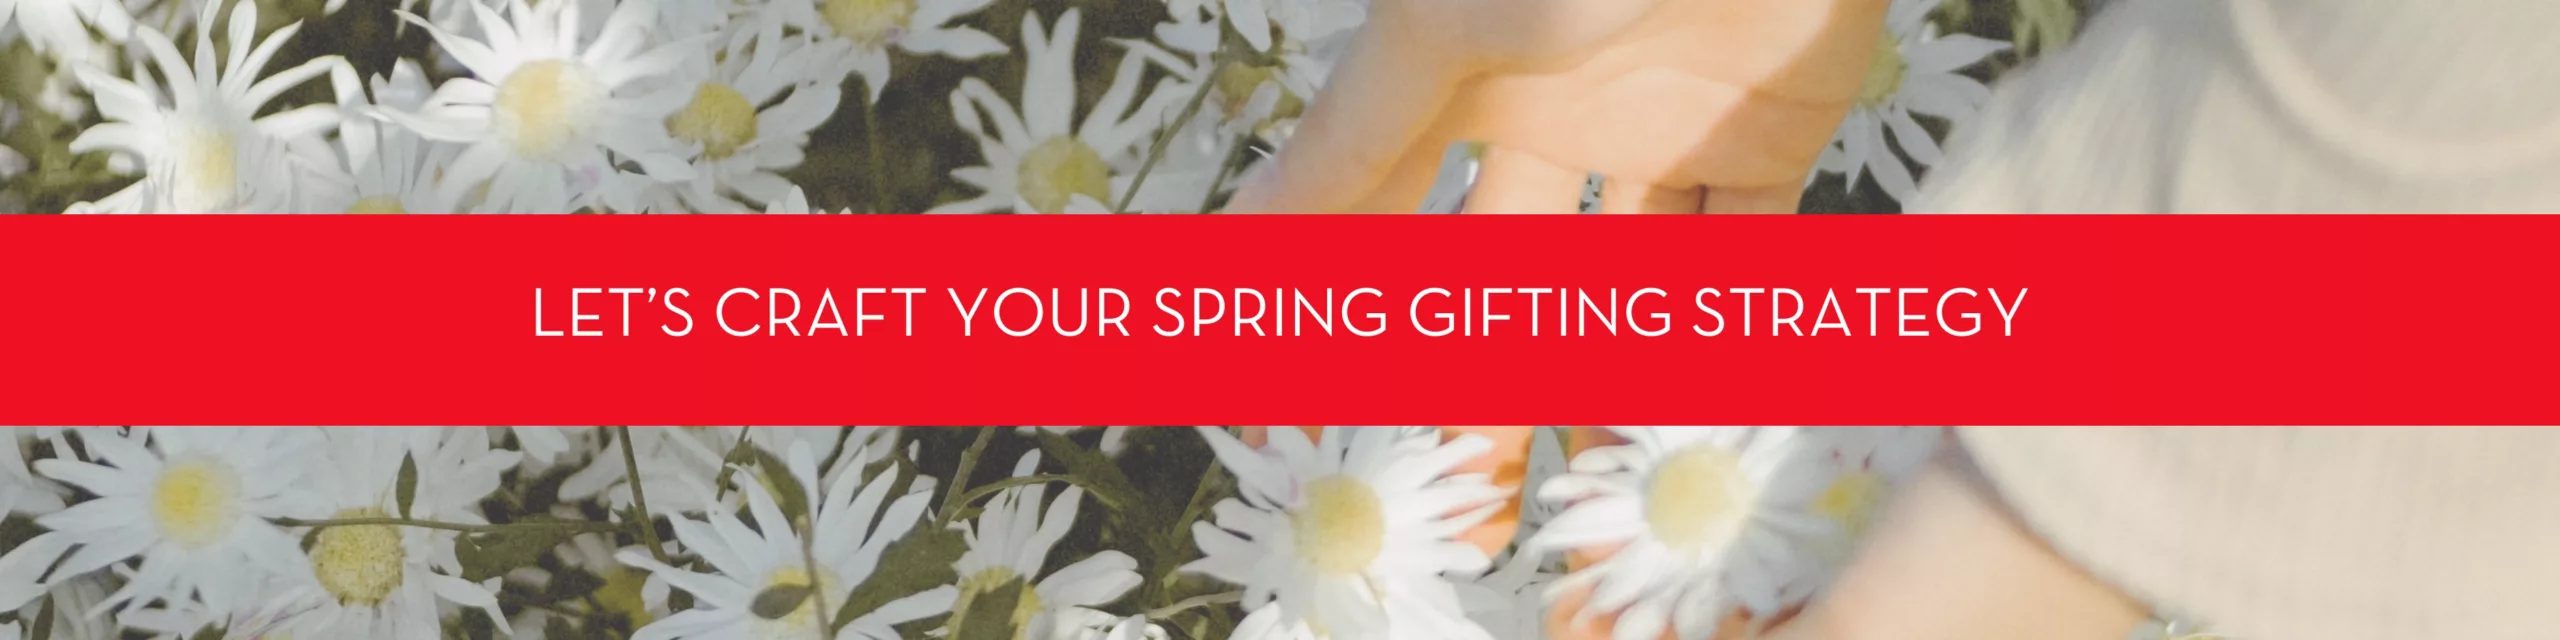 Let's craft your spring gifting strategy